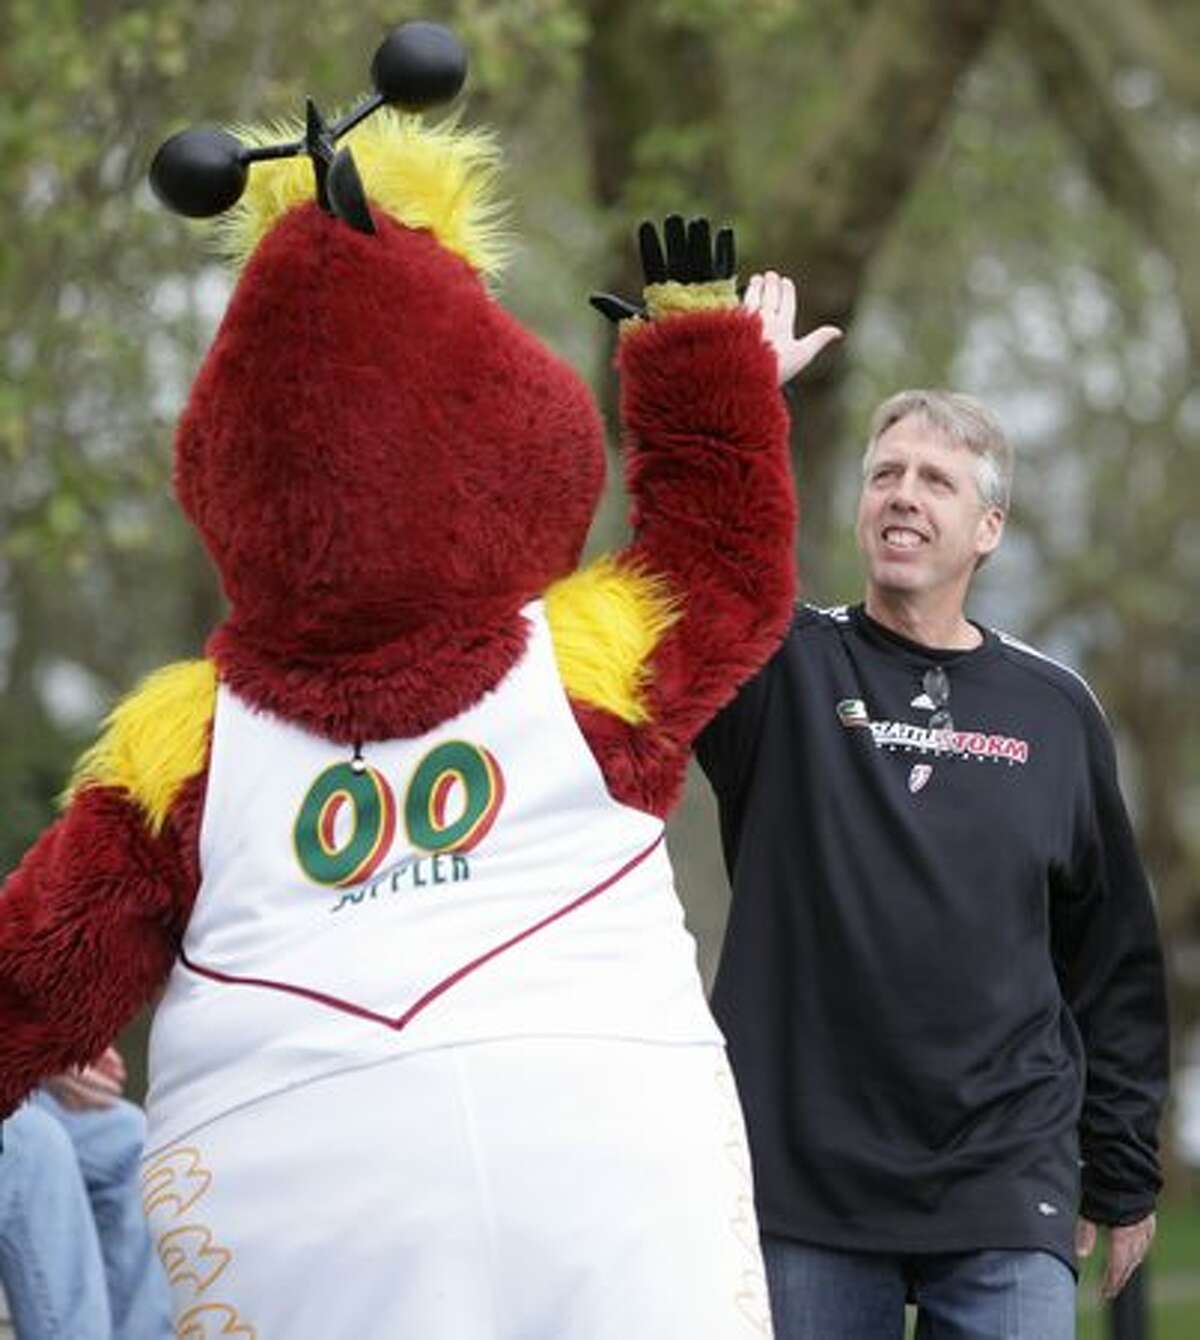 Seattle Storm coach Brian Agler high-fives mascot Doppler during the team's "Stormin' the Lake" fan event at Green Lake Park in Seattle on Saturday May 1, 2010. The season begins on May 16th with a game against Los Angeles. The Storm also host a preseason game on Sunday May 2nd against Phoenix.